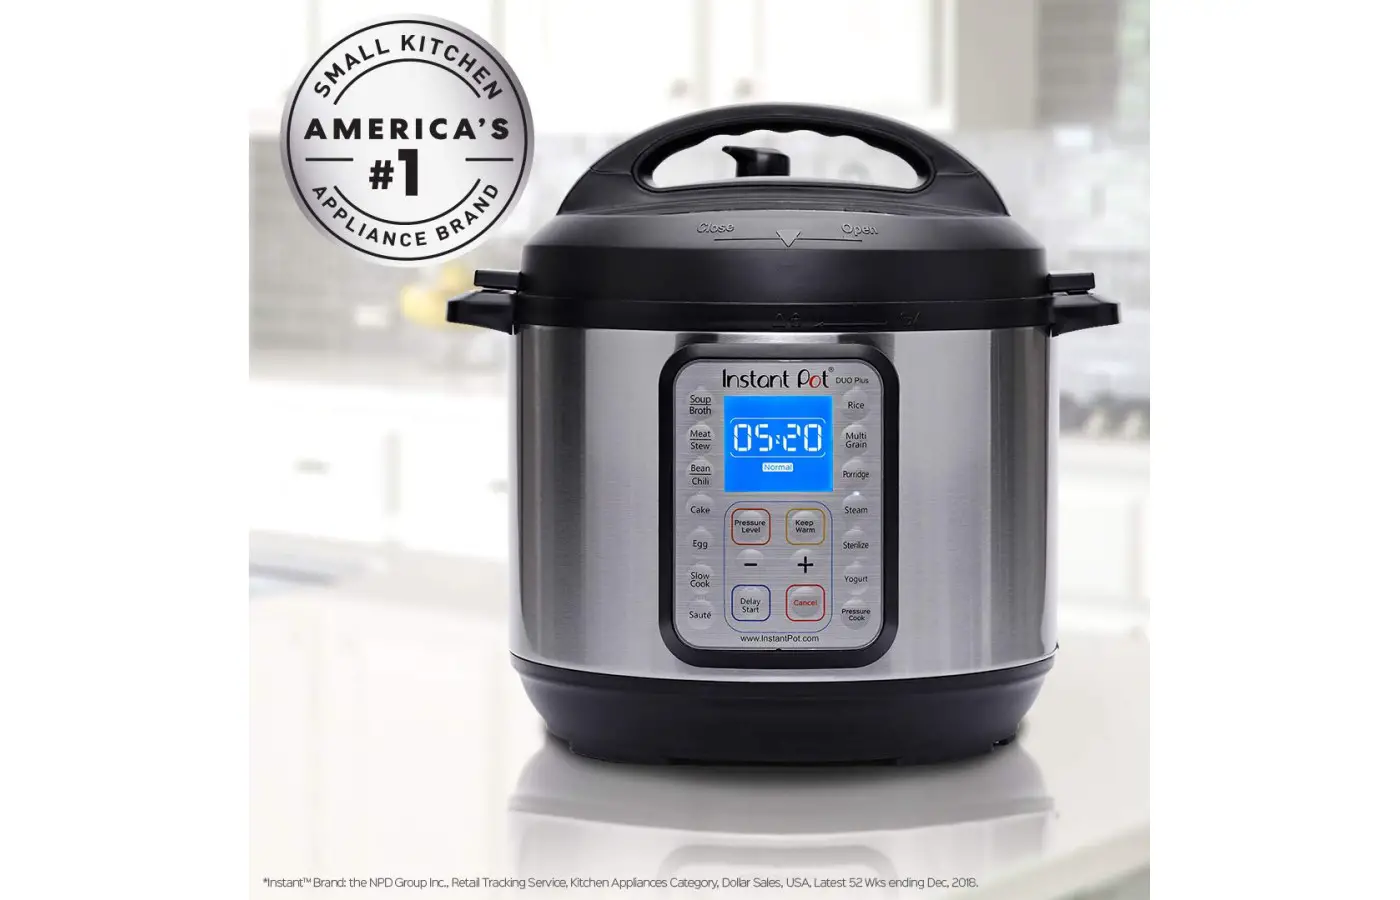 The Instant Pot Duo Plus was ranked number one in the Kitchen Appliance Category, USA for 52 weeks in 2018.